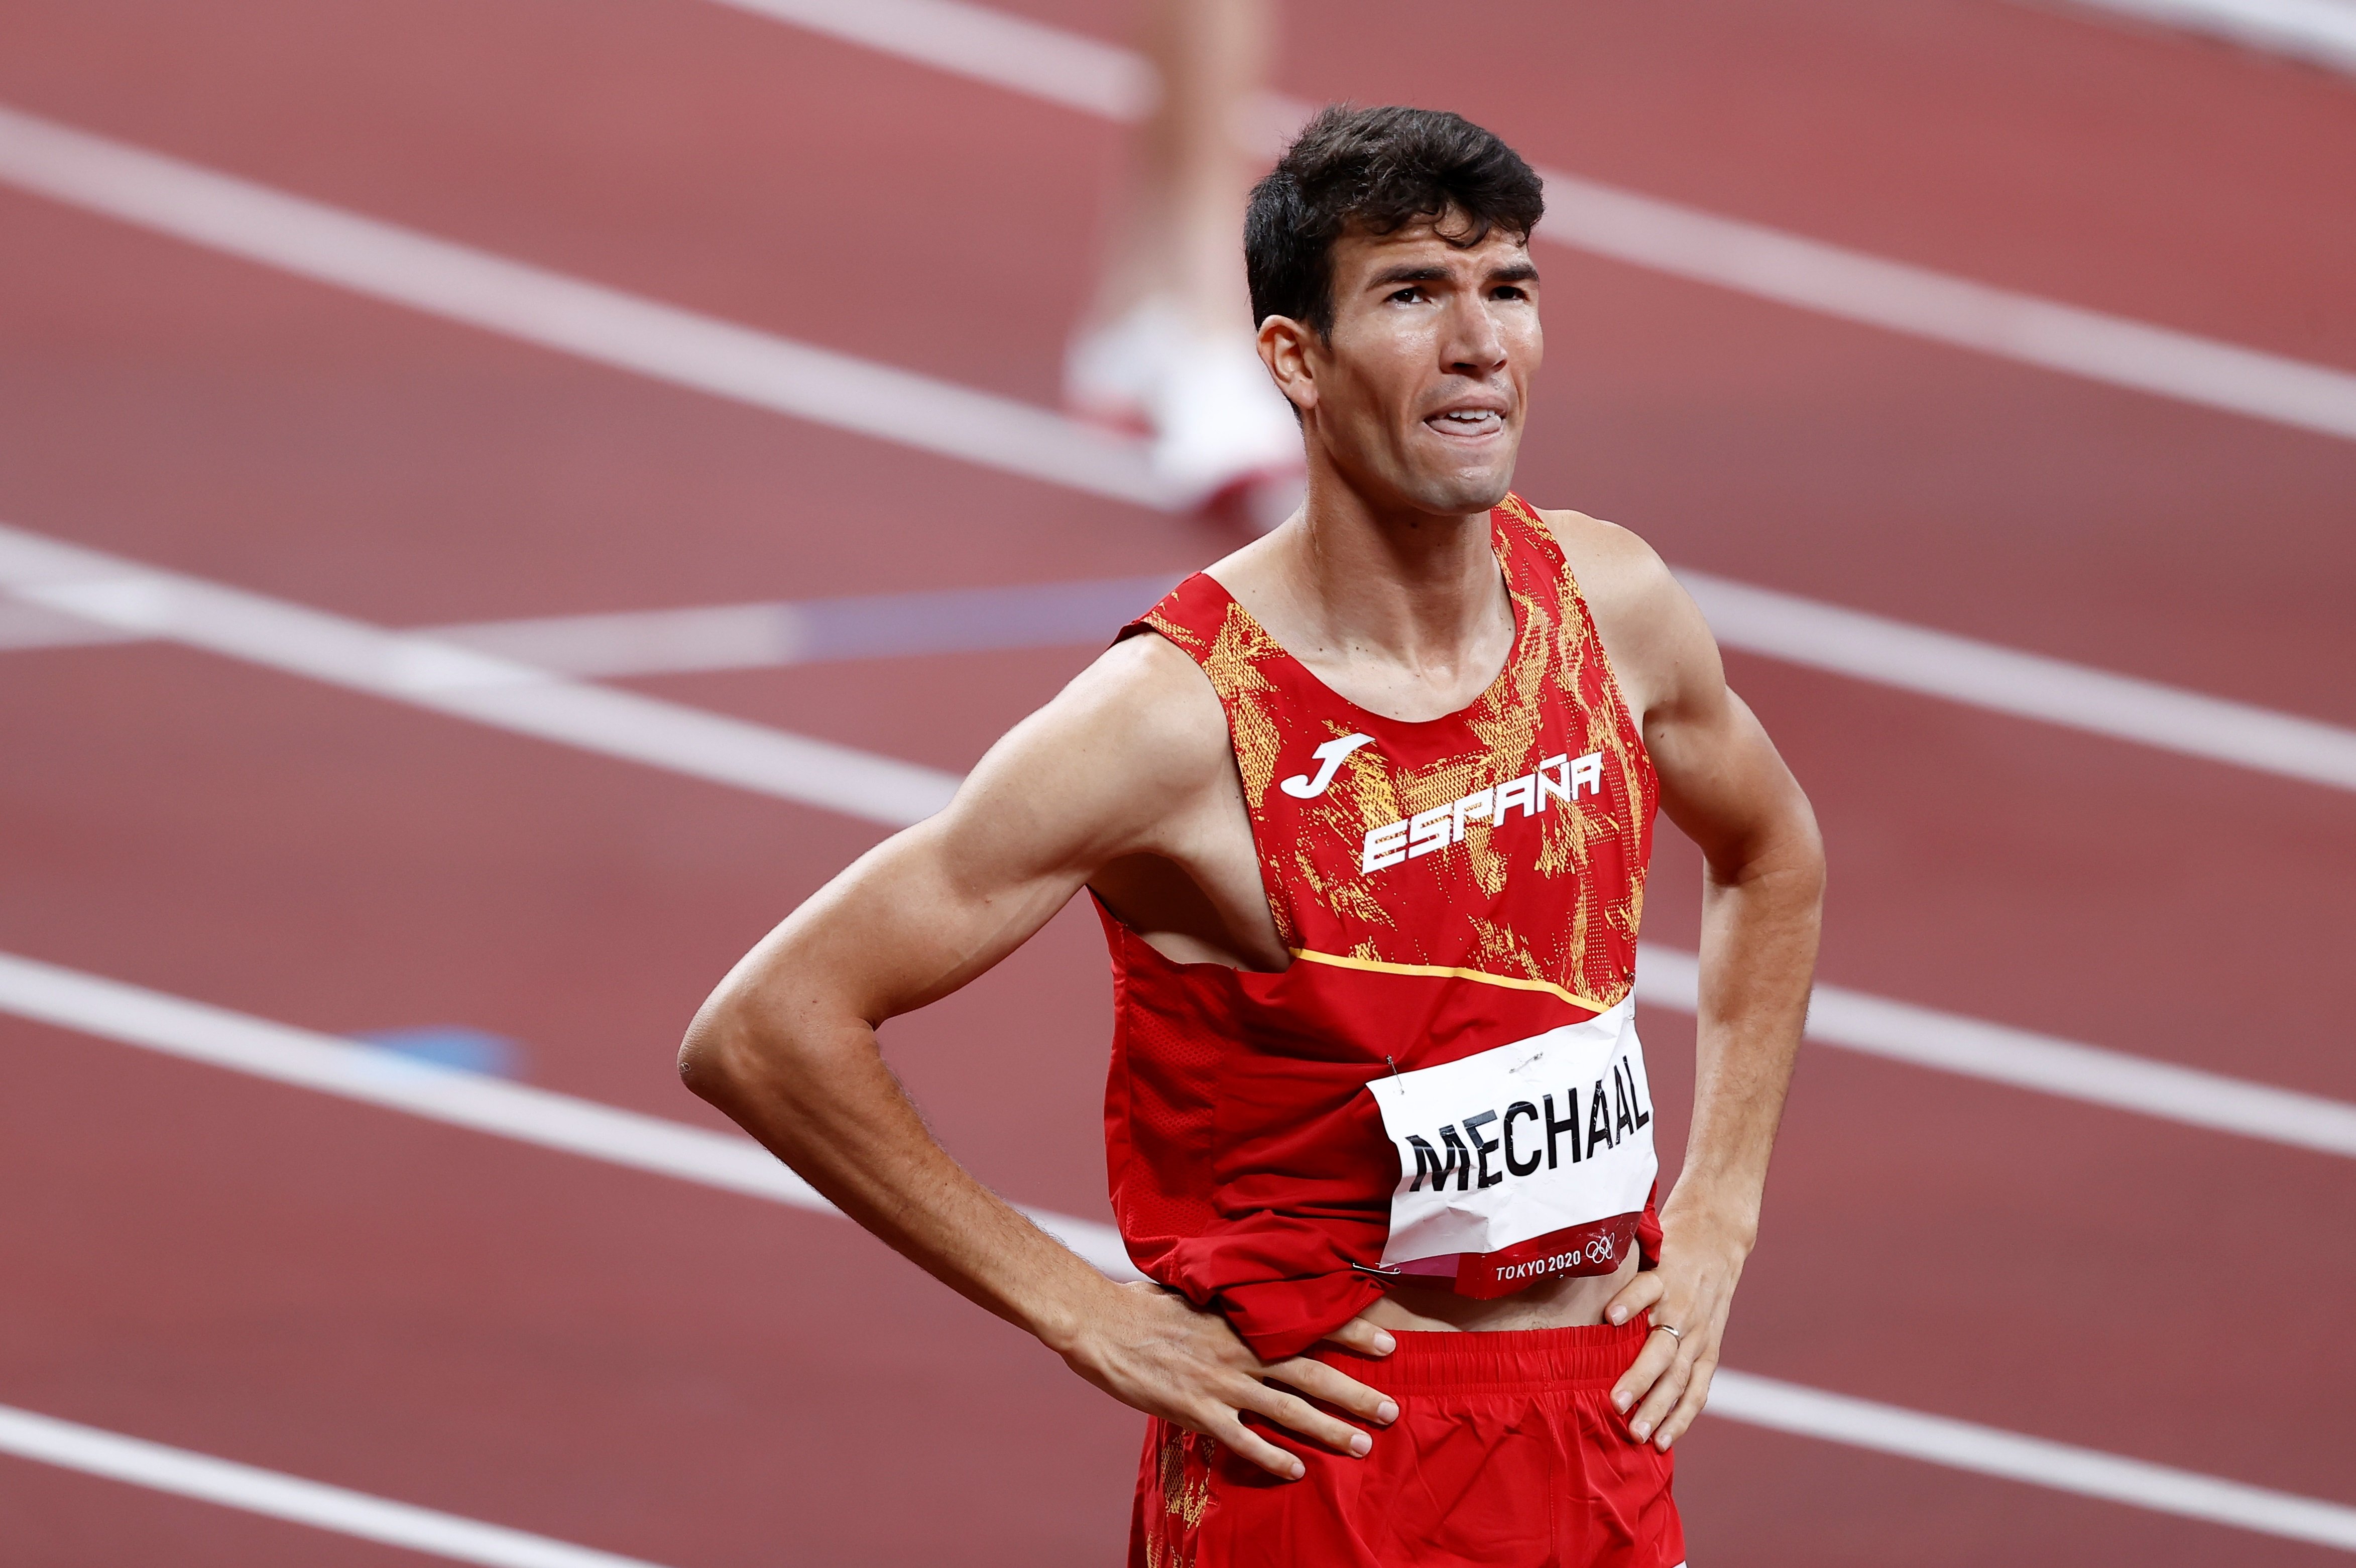 Catalan athlete Adel Mechaal thanks Girona Hospital for caring for his mother